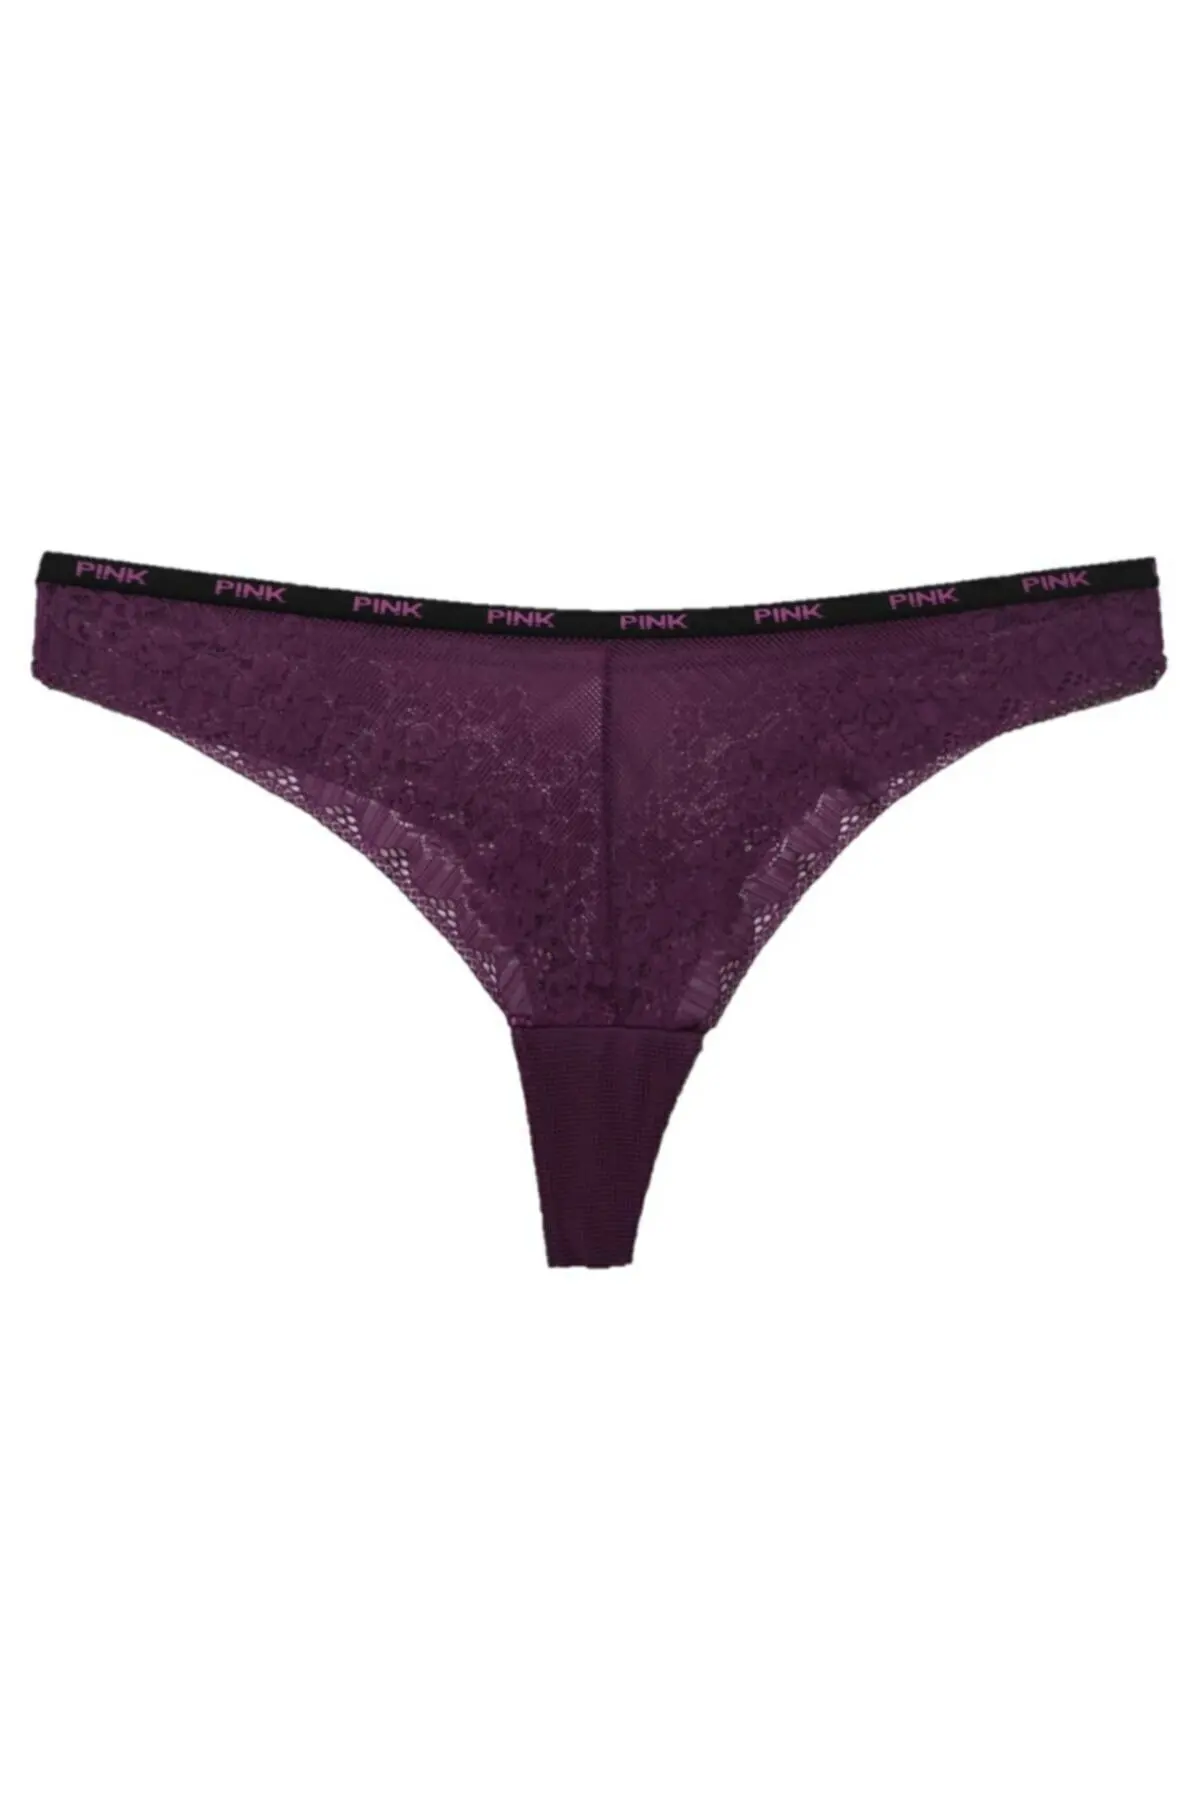 LOOK FOR YOUR WONDERFUL NIGHTS WITH ITS STUNNING COLOR ELEGANT LINGERIE Women's Purple Lace String.   FREE  SHIPPING